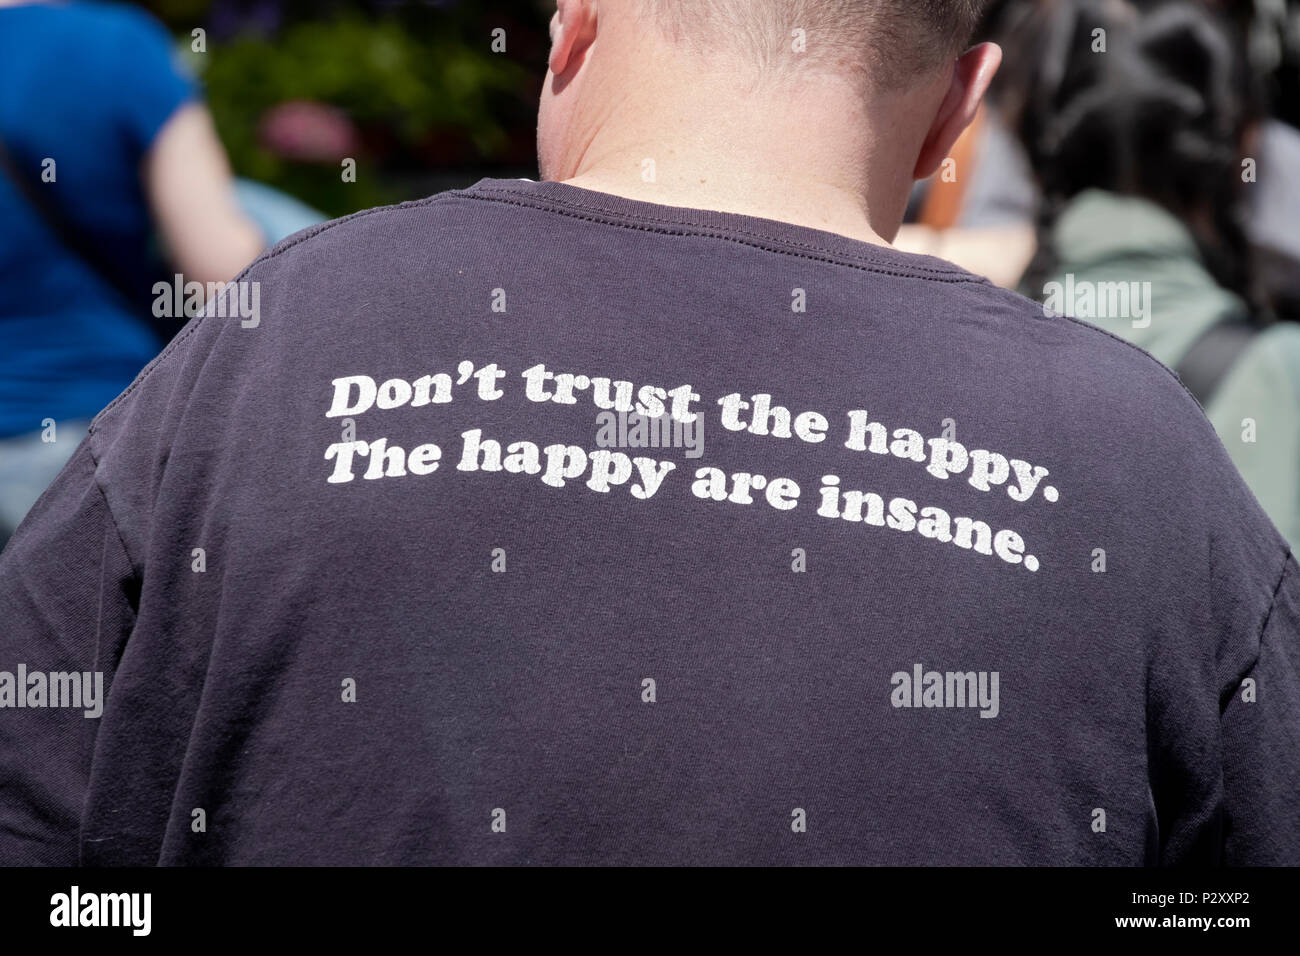 A funny message on the back of a tee shirt saying that happy people are insane & not trustworthy. In lower Manhattan, New York City. Stock Photo